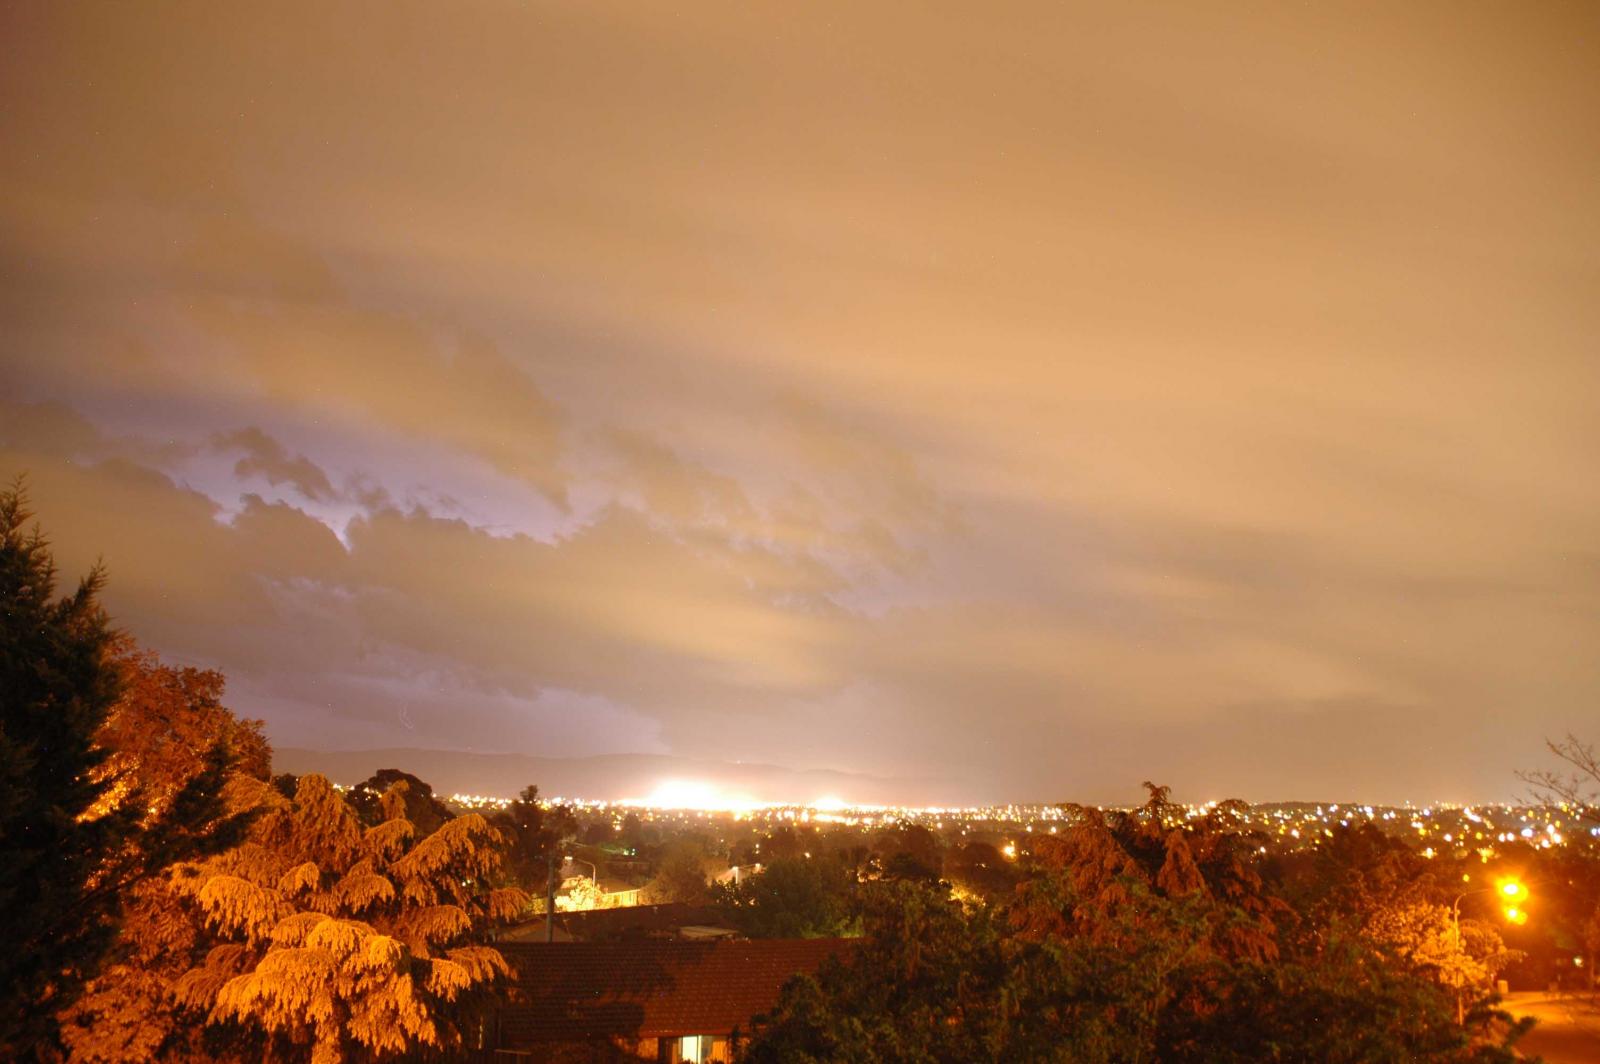 View from my balcony at night of distant lightning over Brindabellas